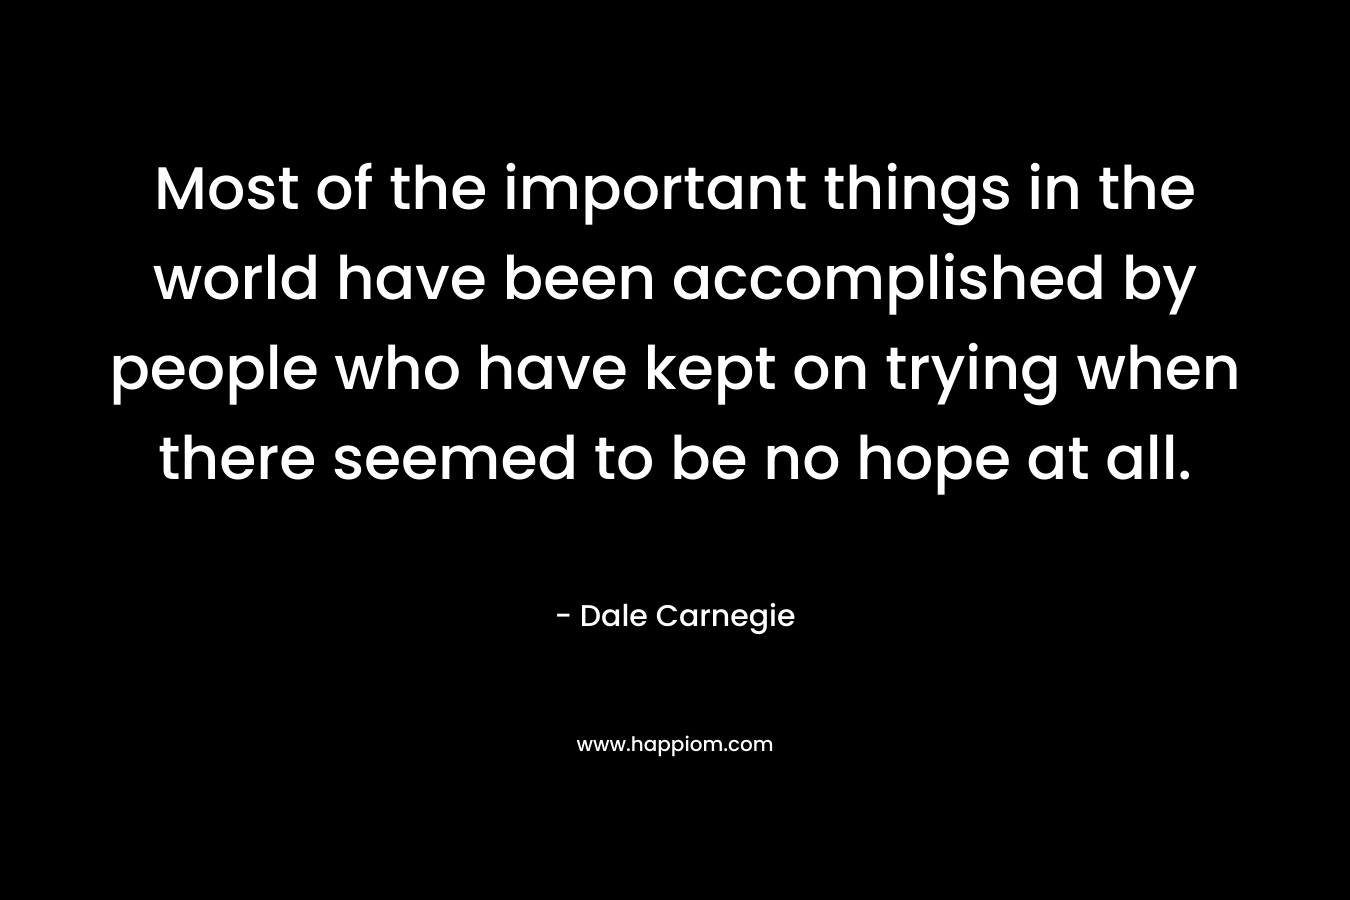 Most of the important things in the world have been accomplished by people who have kept on trying when there seemed to be no hope at all.